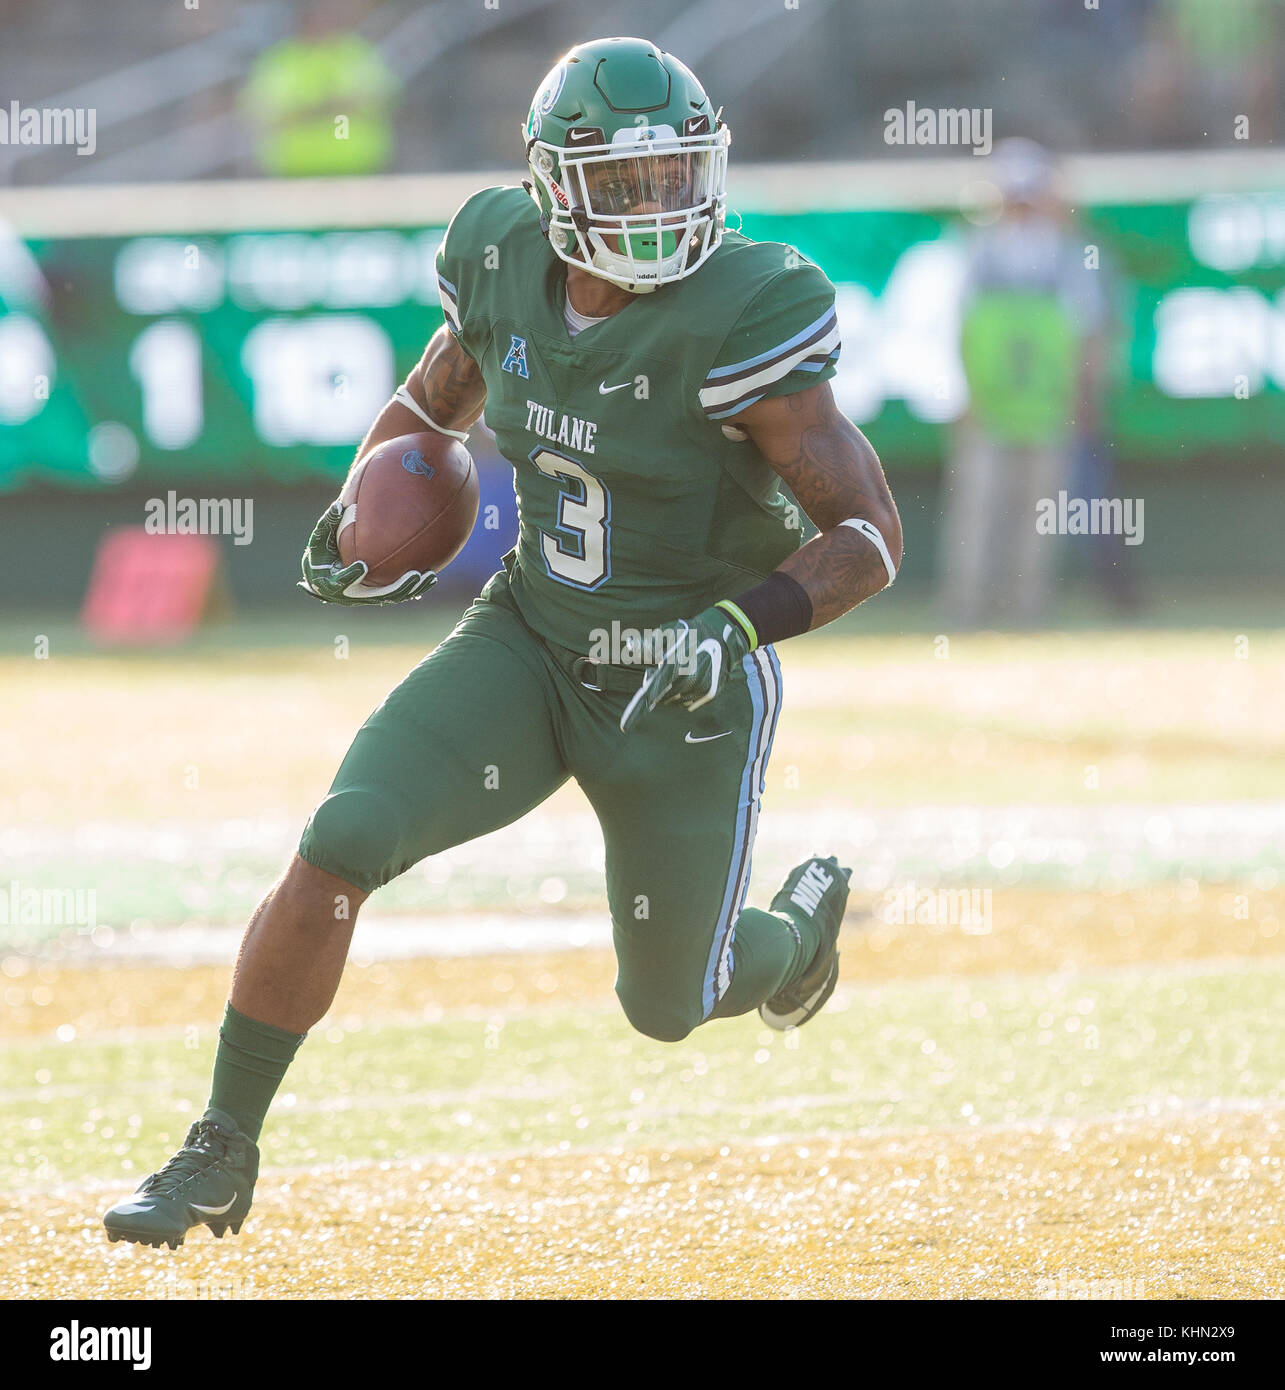 New Orleans, LA, USA. 18th Nov, 2017. Tlane RB Sherman Badie #3 turns the corner on a run during the NCAA football game between the Tulane Green Wave and the Houston Cougars at Yulman Stadium in New Orleans, LA. Kyle Okita/CSM/Alamy Live News Stock Photo